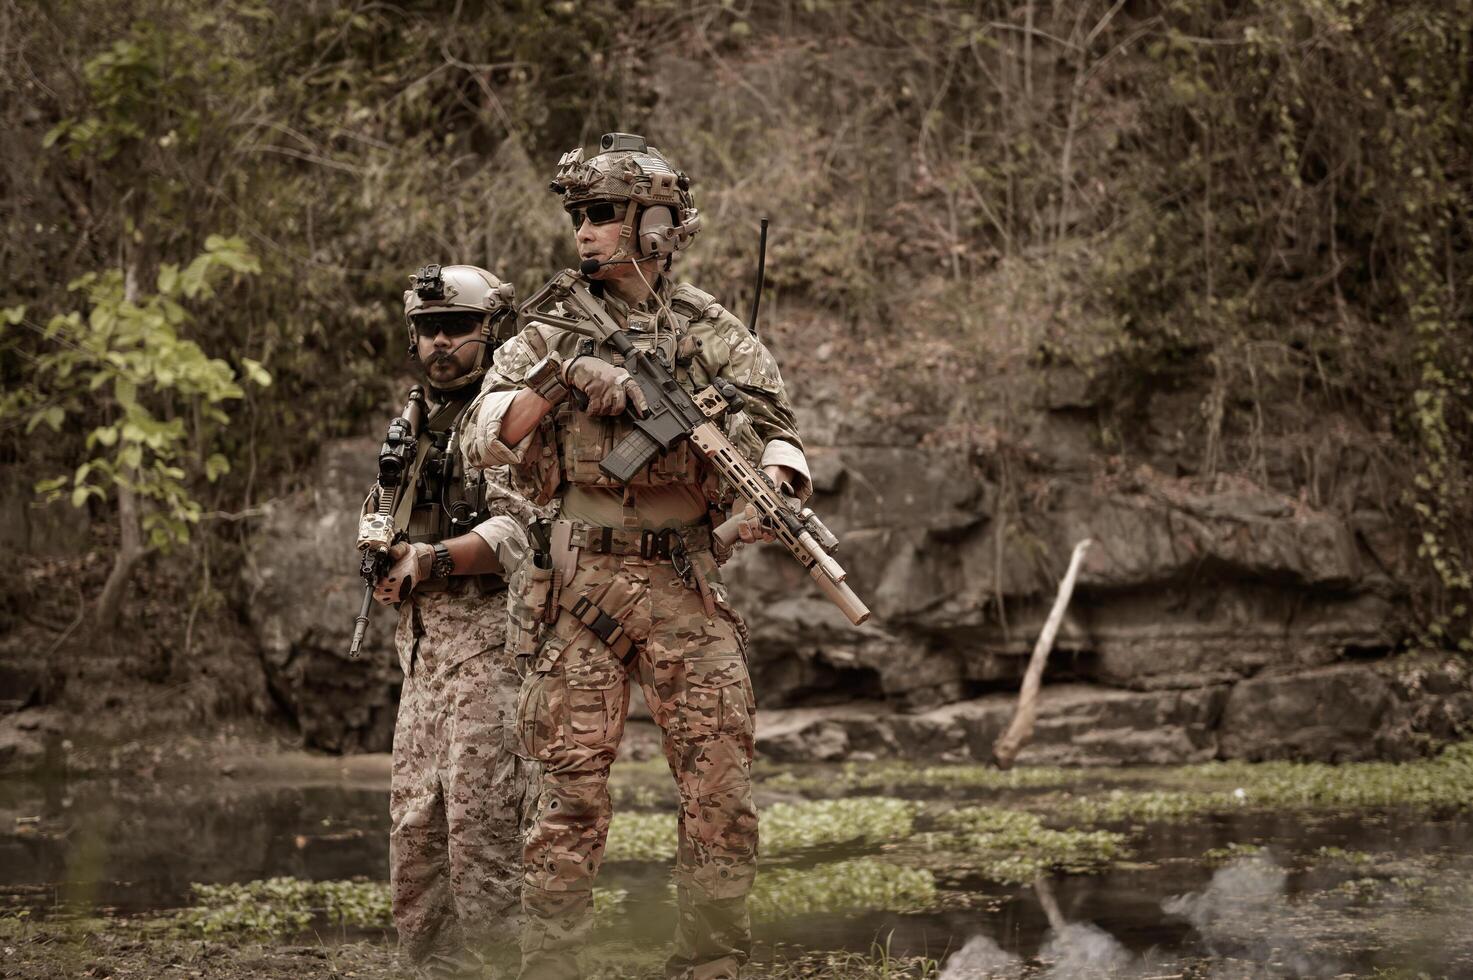 Soldiers in camouflage uniforms aiming with their riflesready to fire during Military Operation in the forest soldiers training in a military operation photo